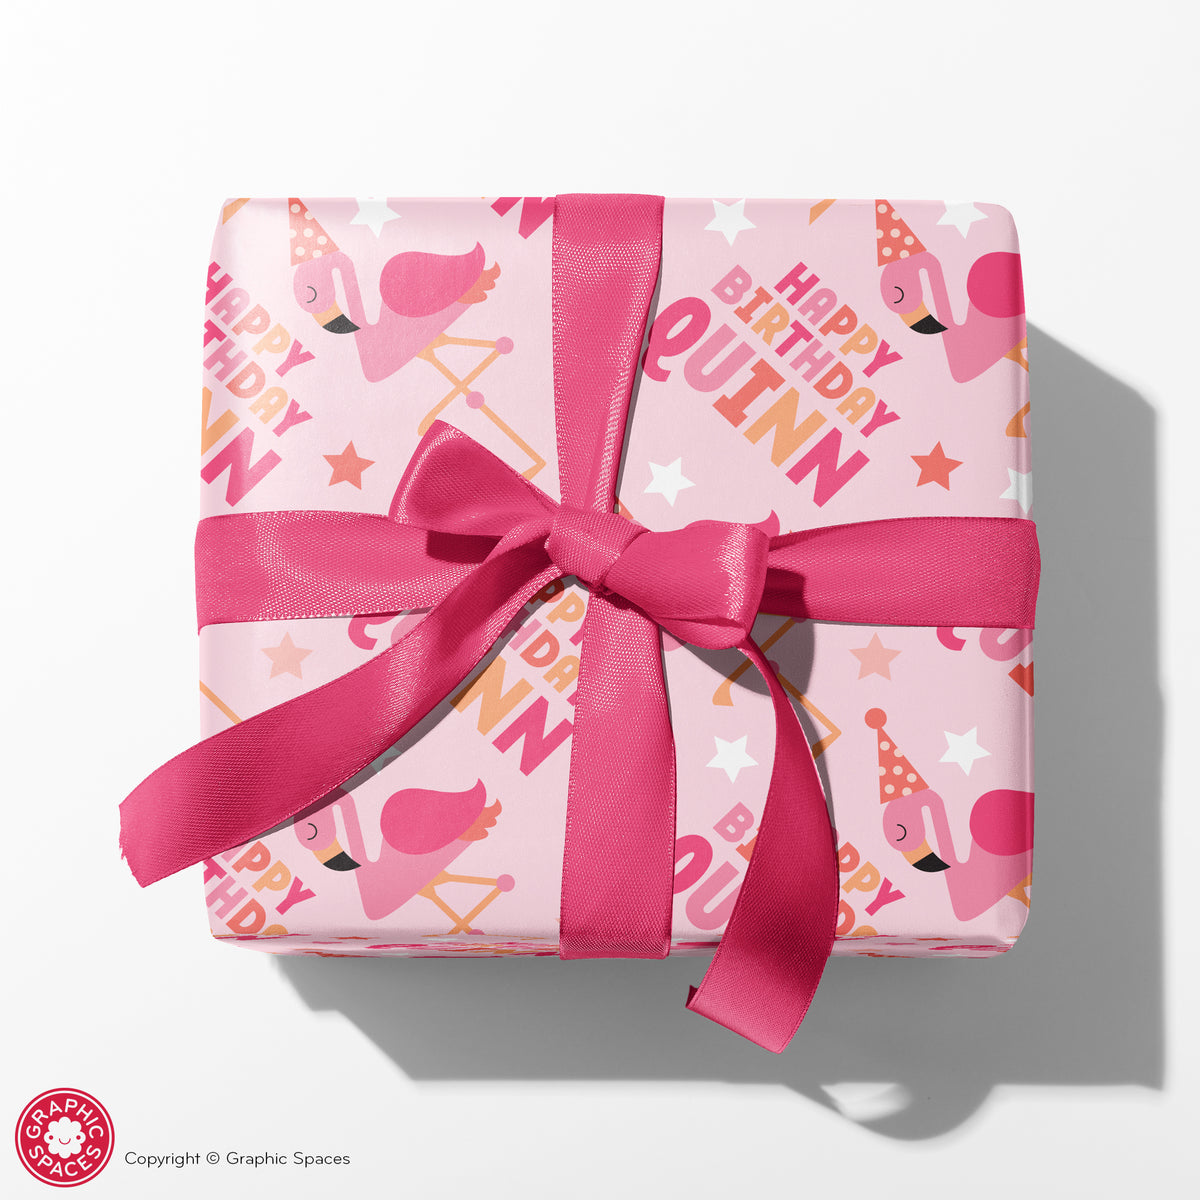 Flamingo Birthday Personalized Wrapping Paper